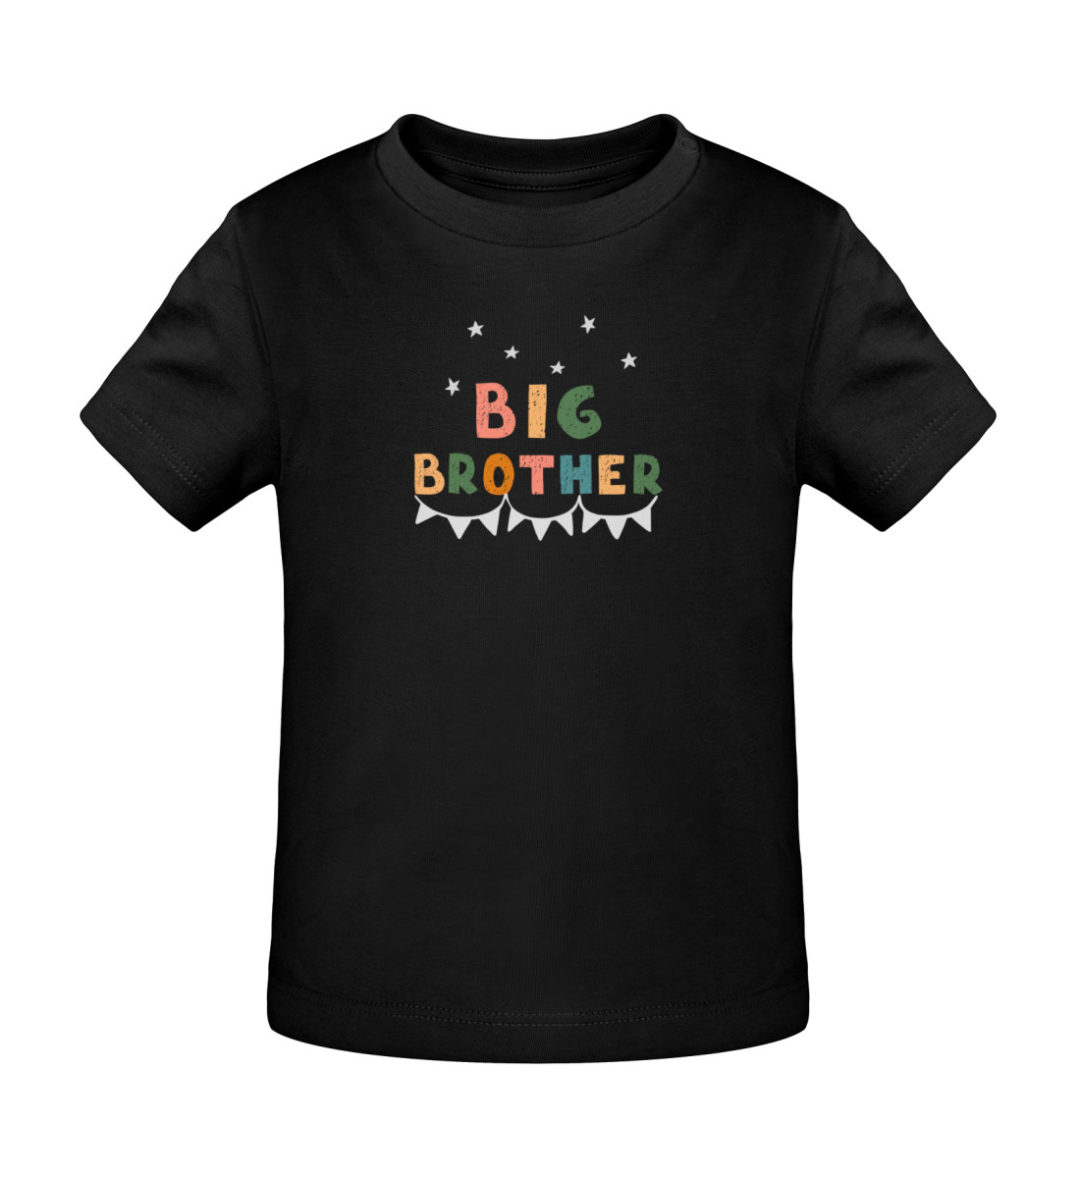 Big Brother - Baby Creator T-Shirt ST/ST-16